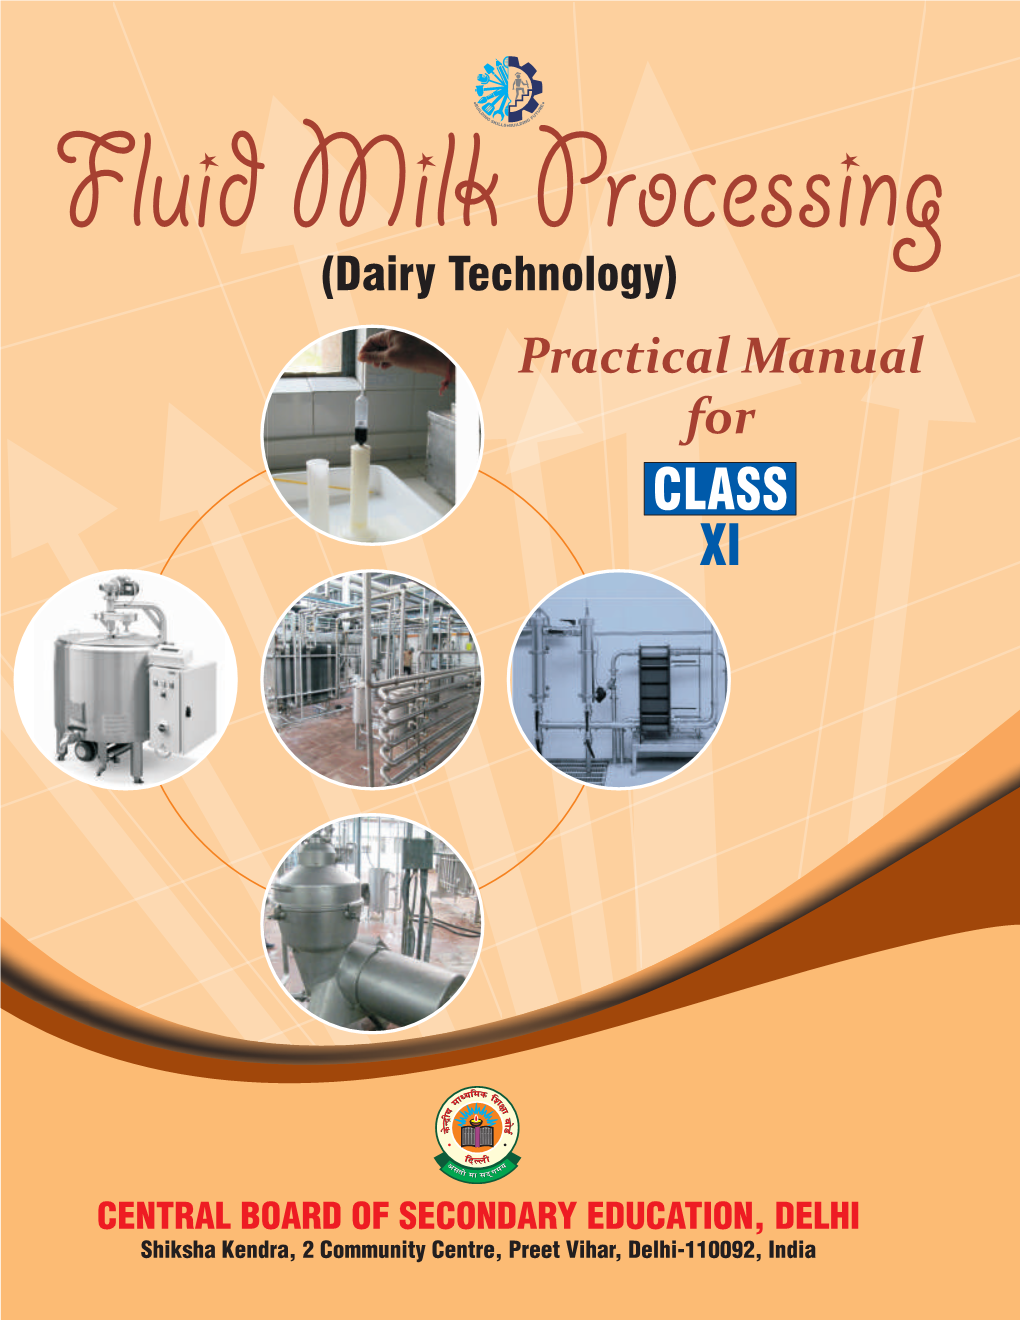 Fluid Milk Processing (Dairy Technology) Practical Manual for CLASS XI